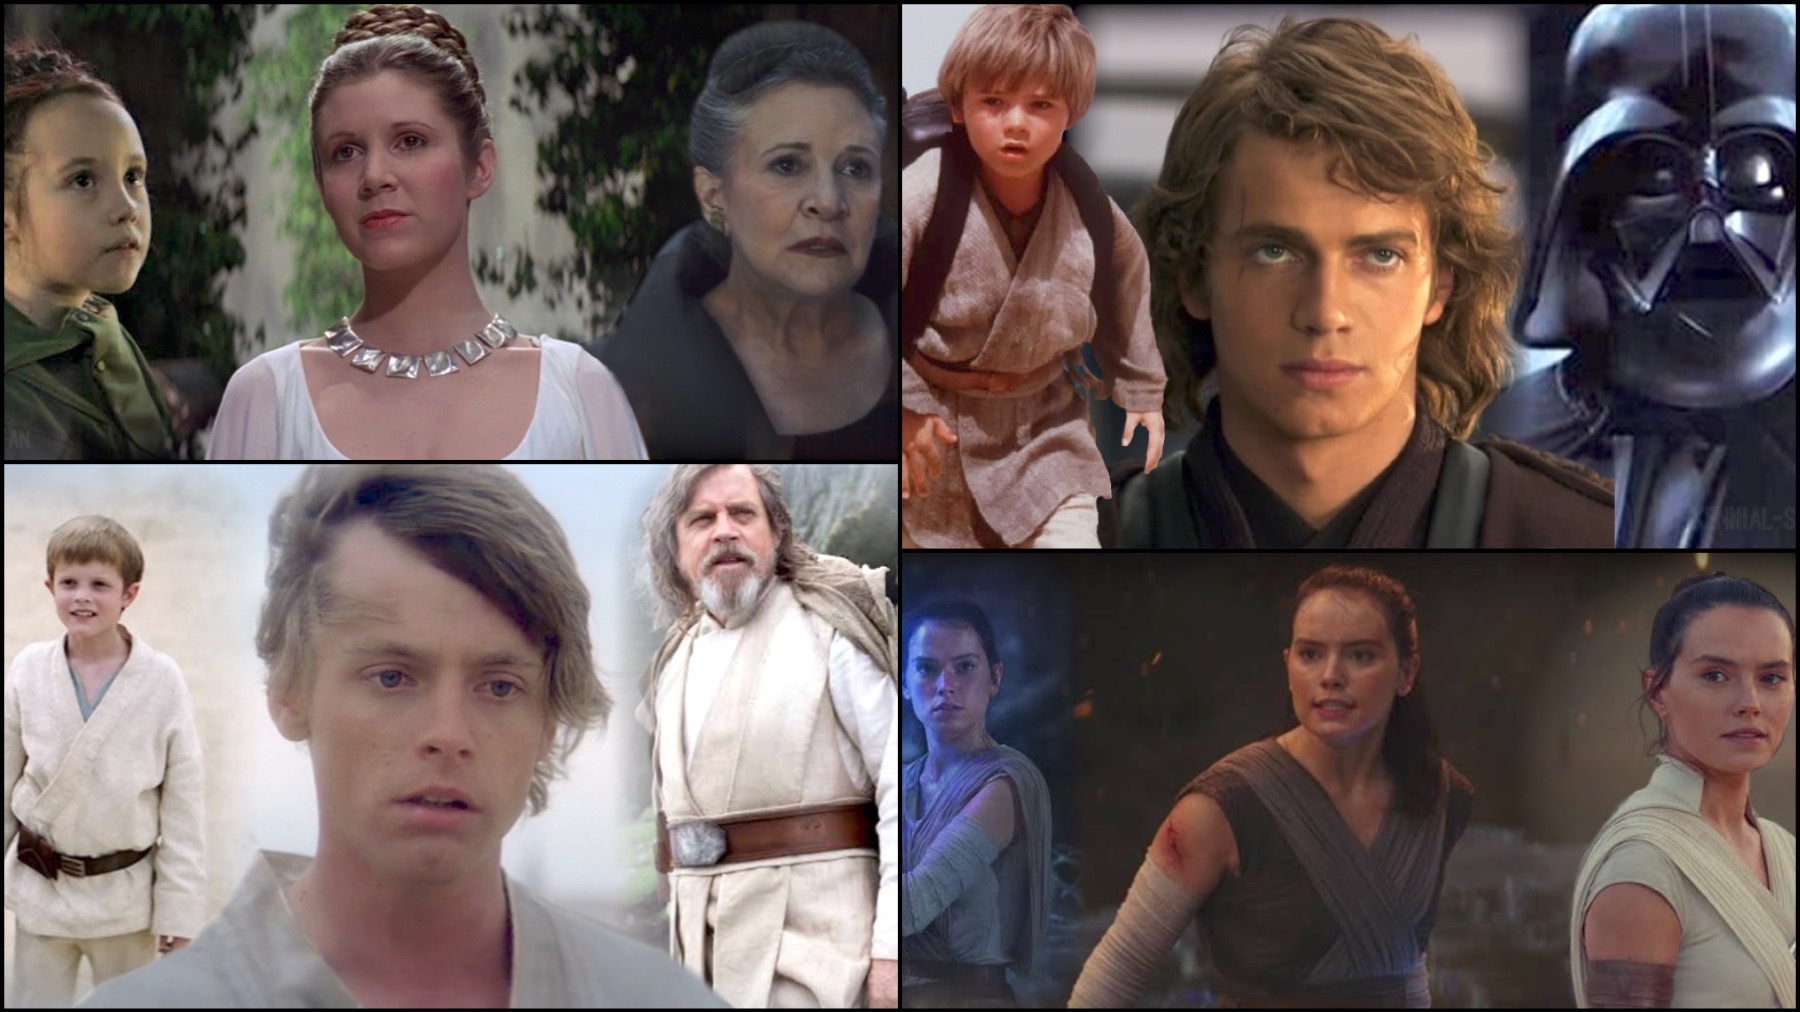 Star Wars characters and different actors